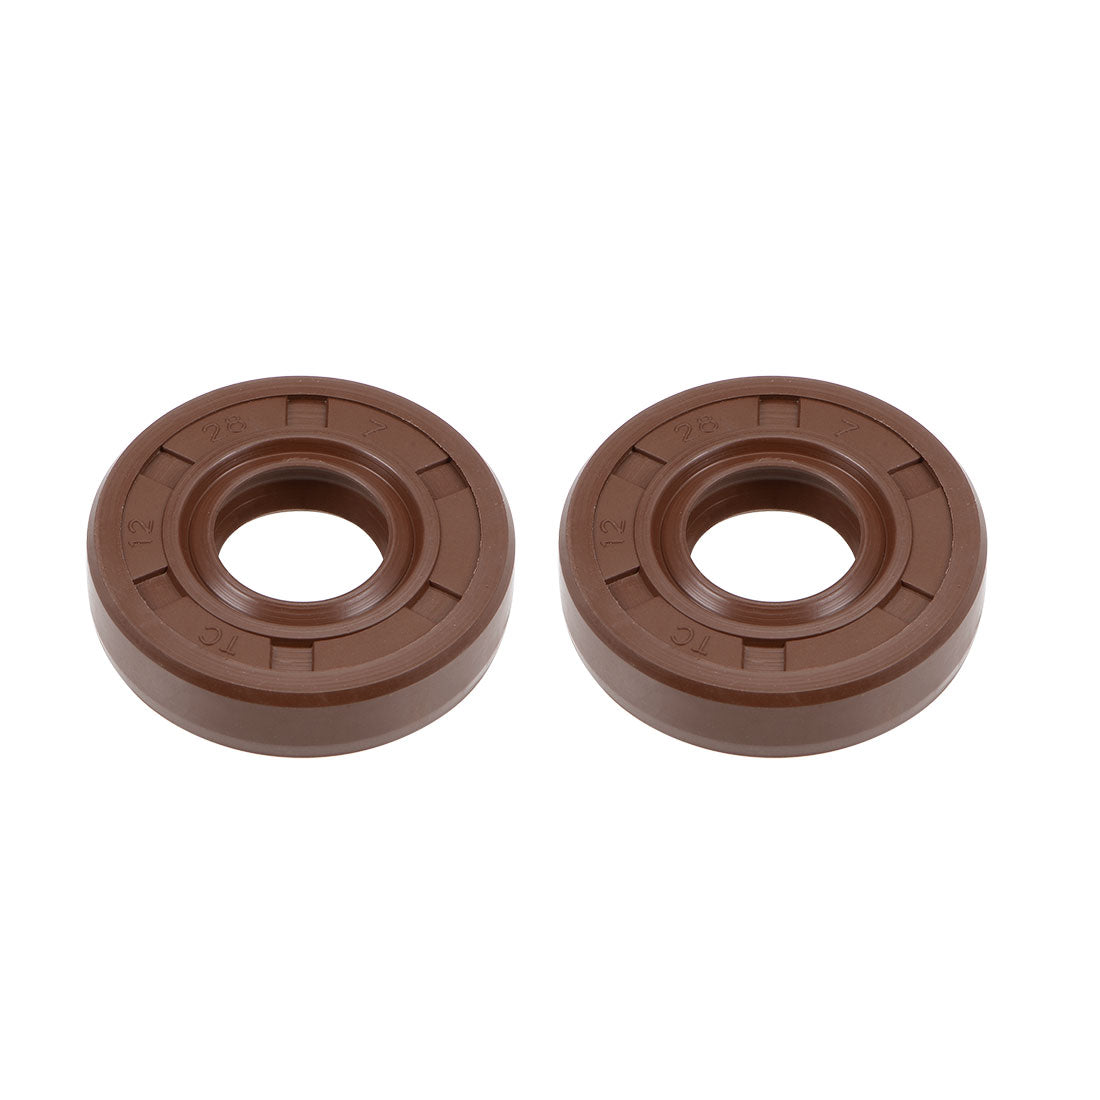 uxcell Uxcell Oil Seal 12mm Inner Dia 28mm OD 7mm Thick Fluorine Rubber Double Lip Seals 2Pcs